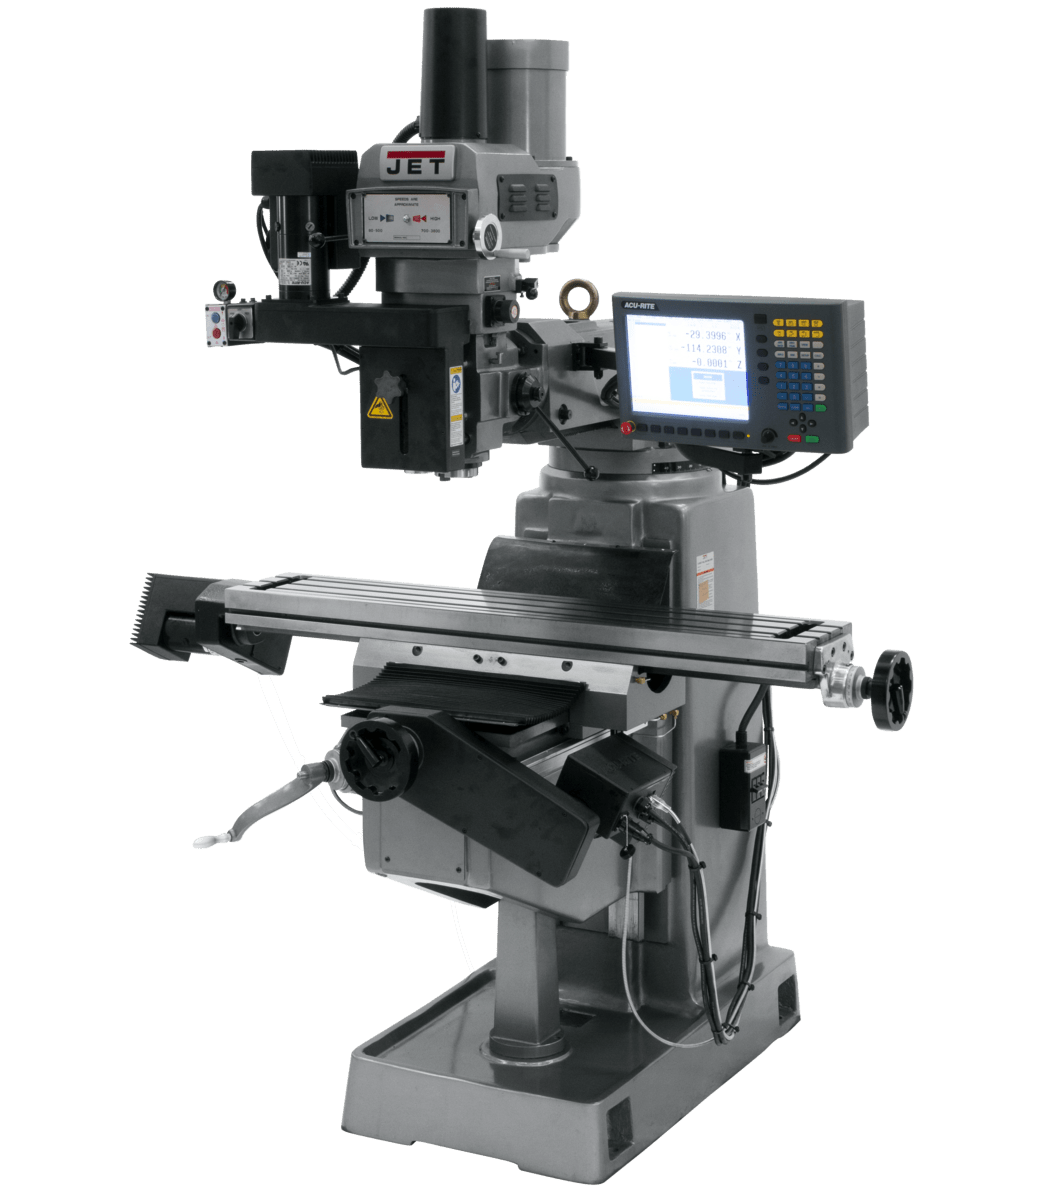 JTM-4VS Mill With 3-Axis ACU-RITE G-2 MILLPWR CNC - Jet